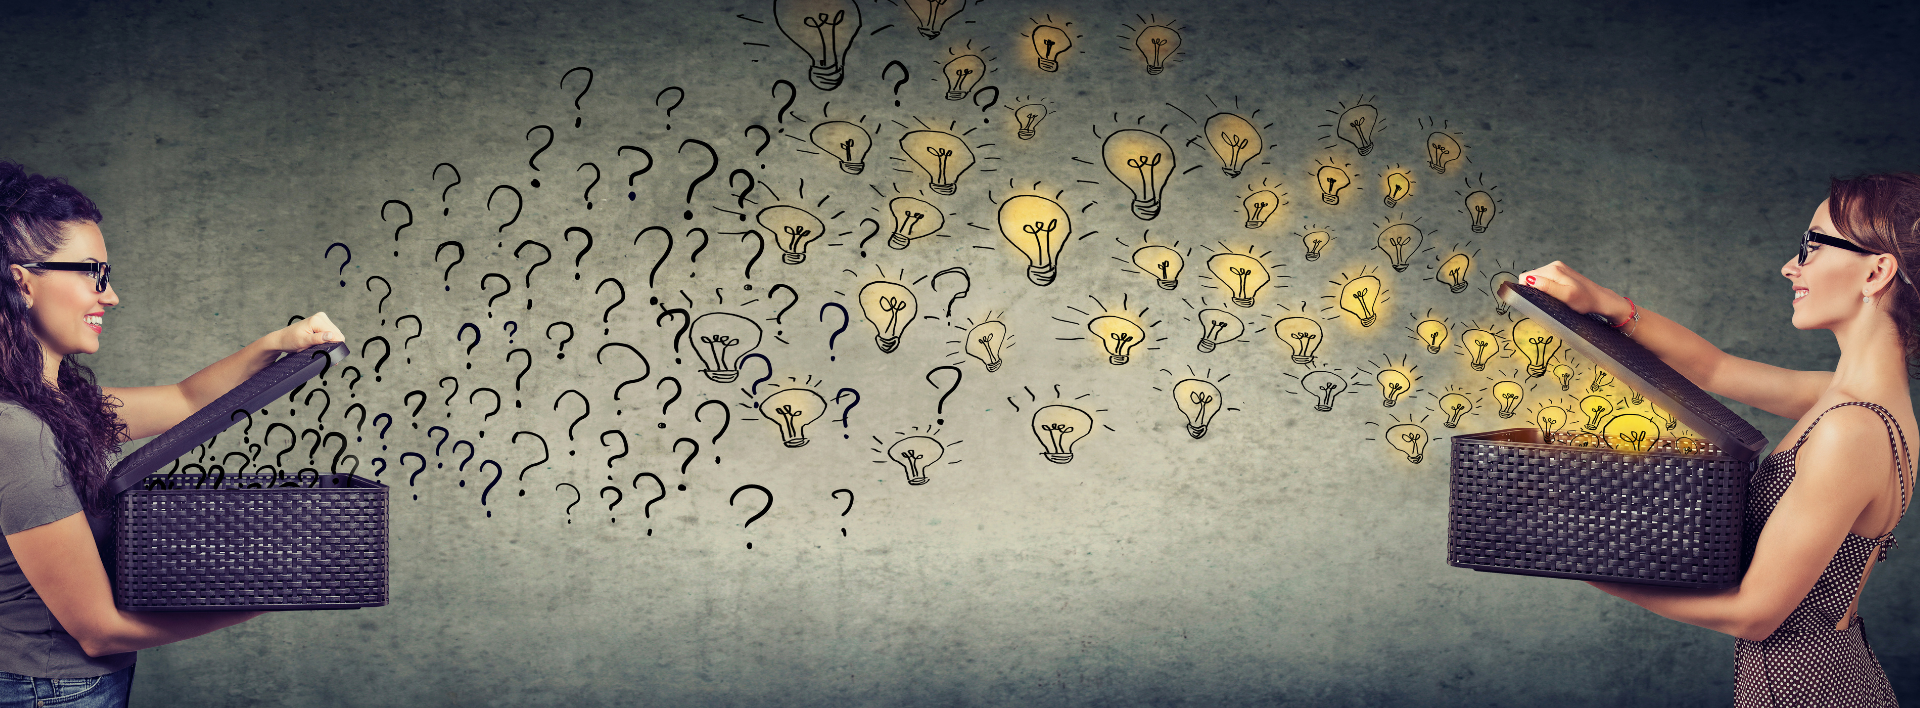 In the image are two women holding open boxes. To the left question marks fly out of the box and to the right light bulbs fly out of the box, depicting questions, answers and collaboration